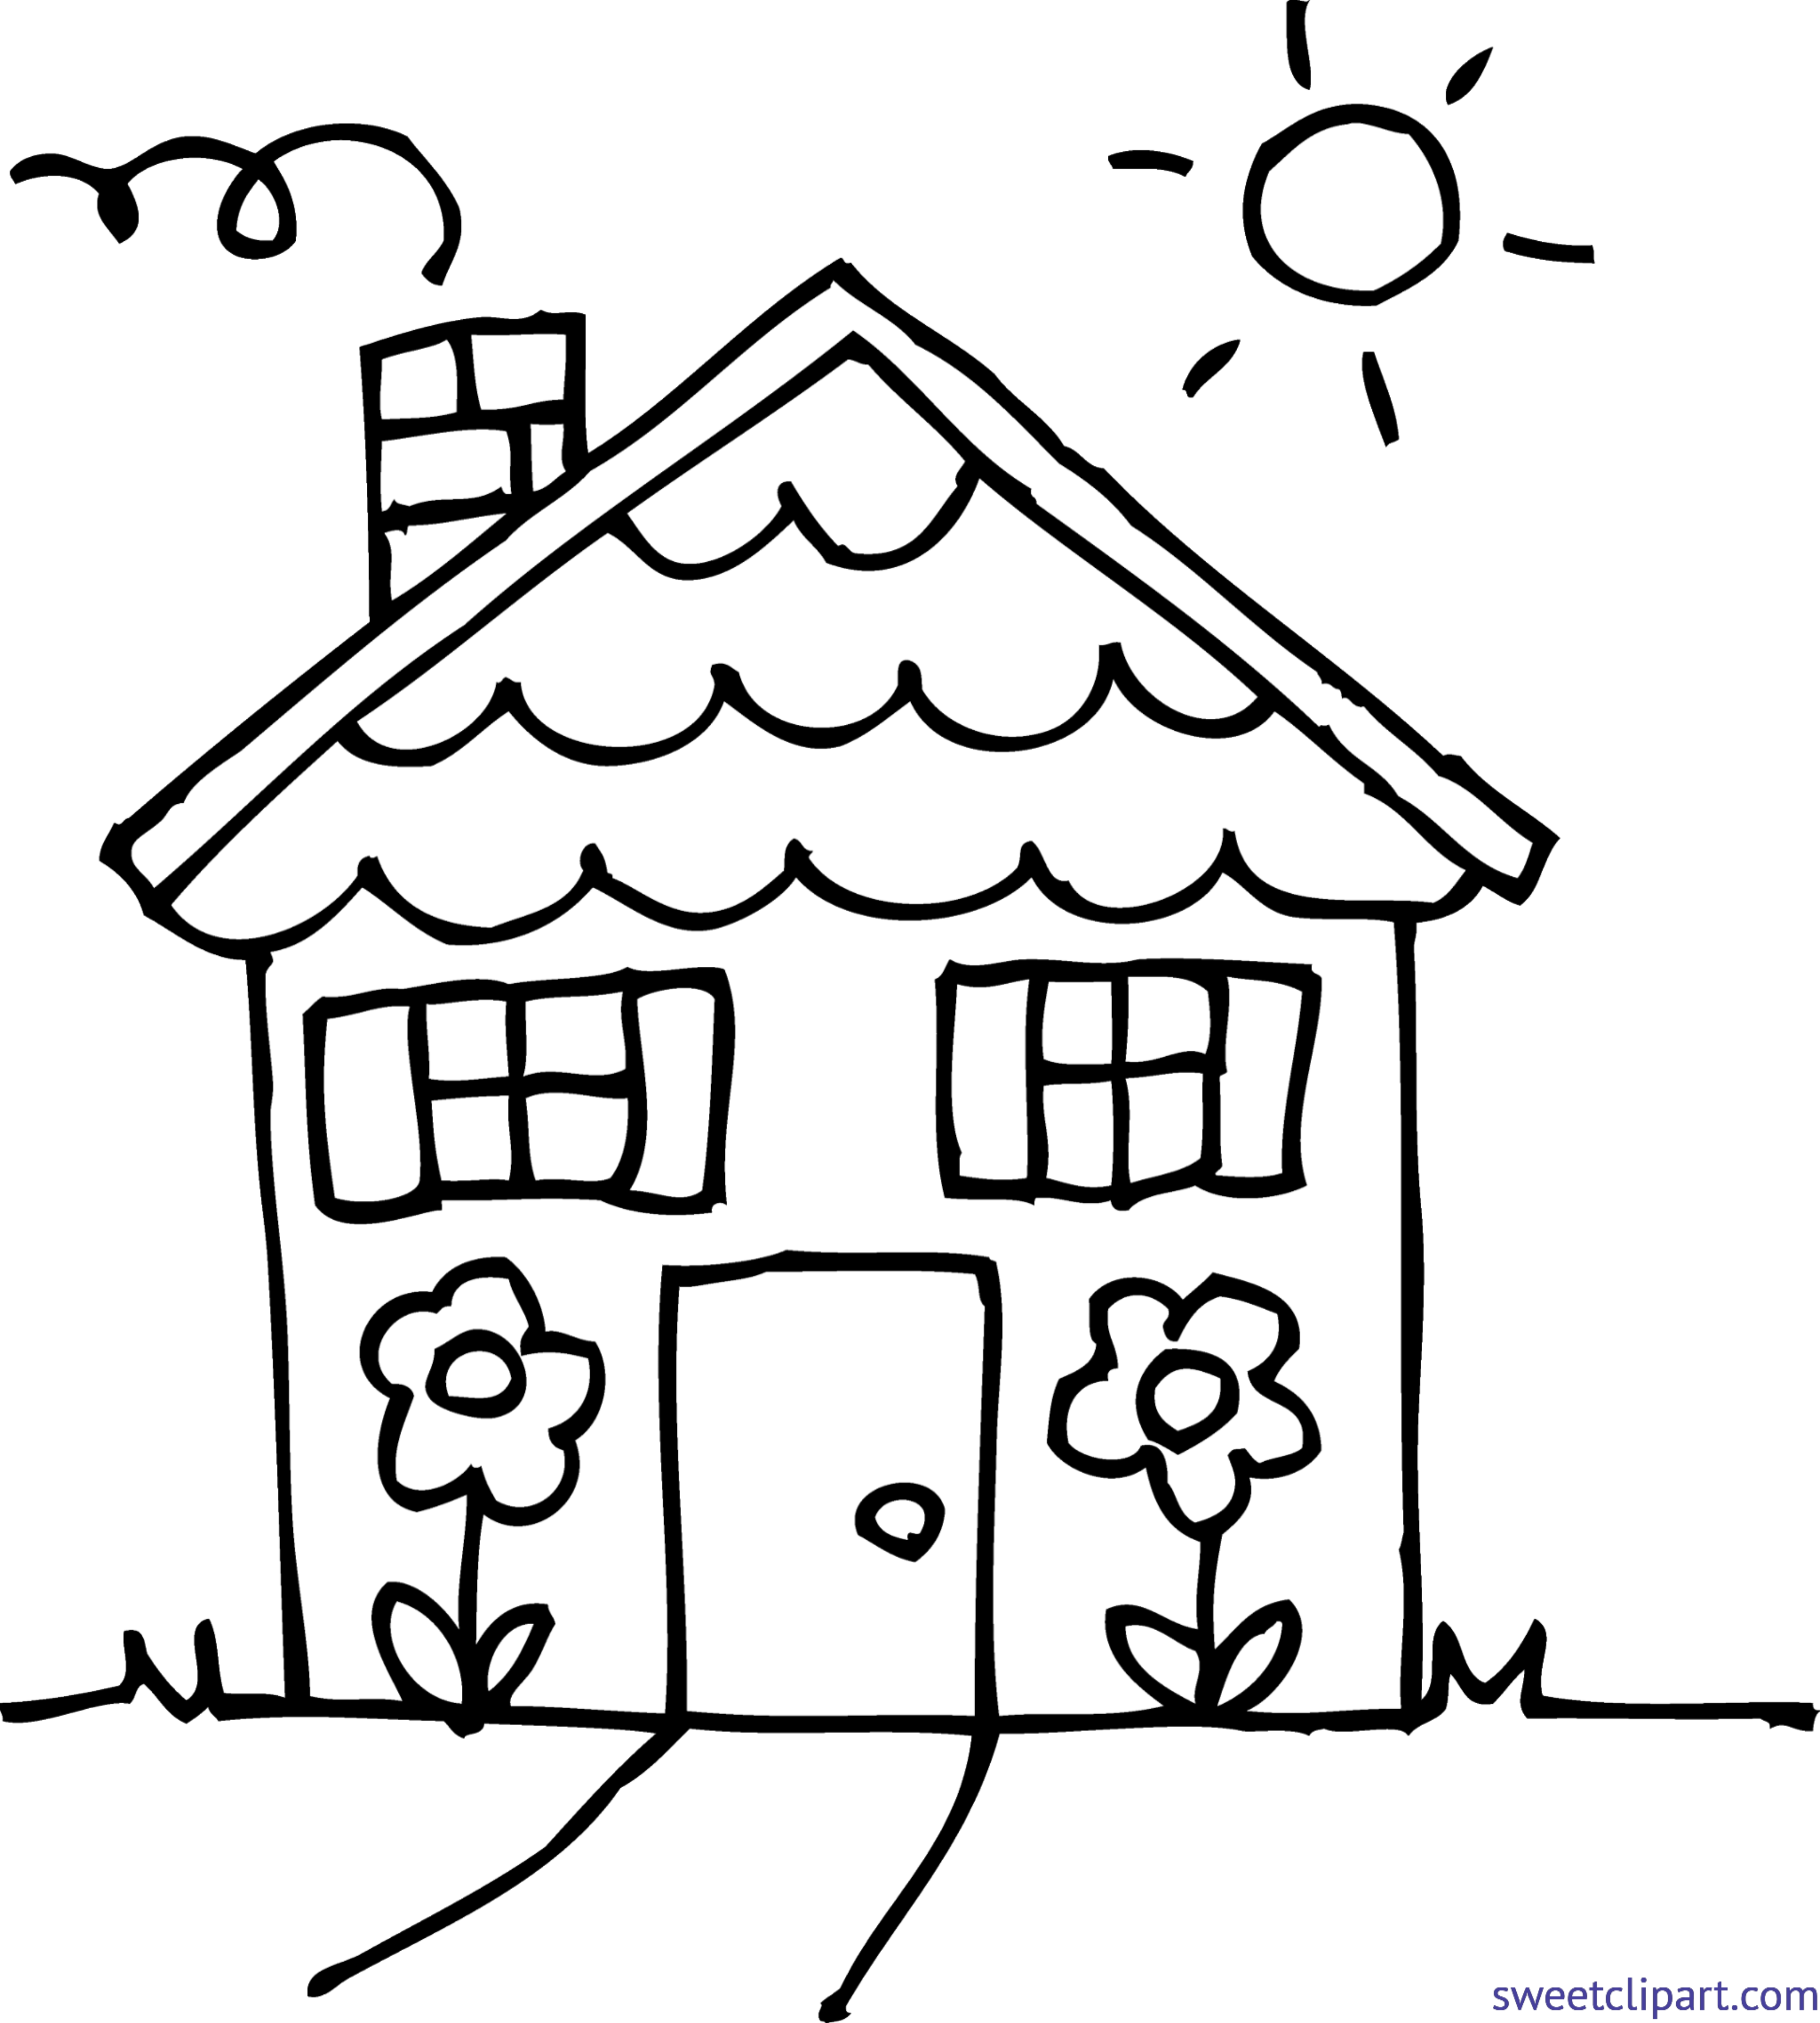 Line drawing clip art. Clipart lake mouse house